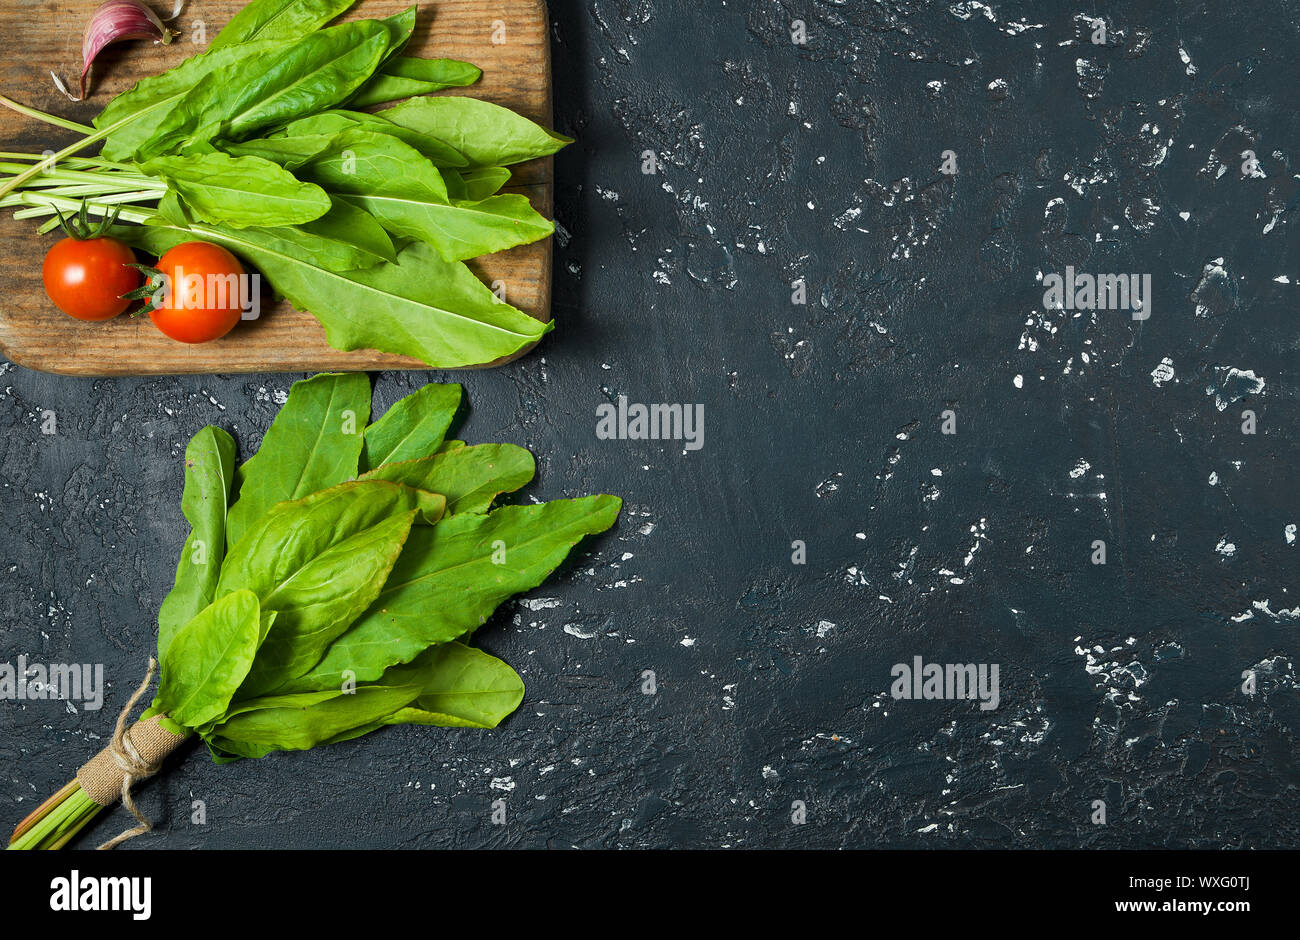 Green sorrel. Fresh sorrel leaves on a dark surface. View from above. Copy space Stock Photo